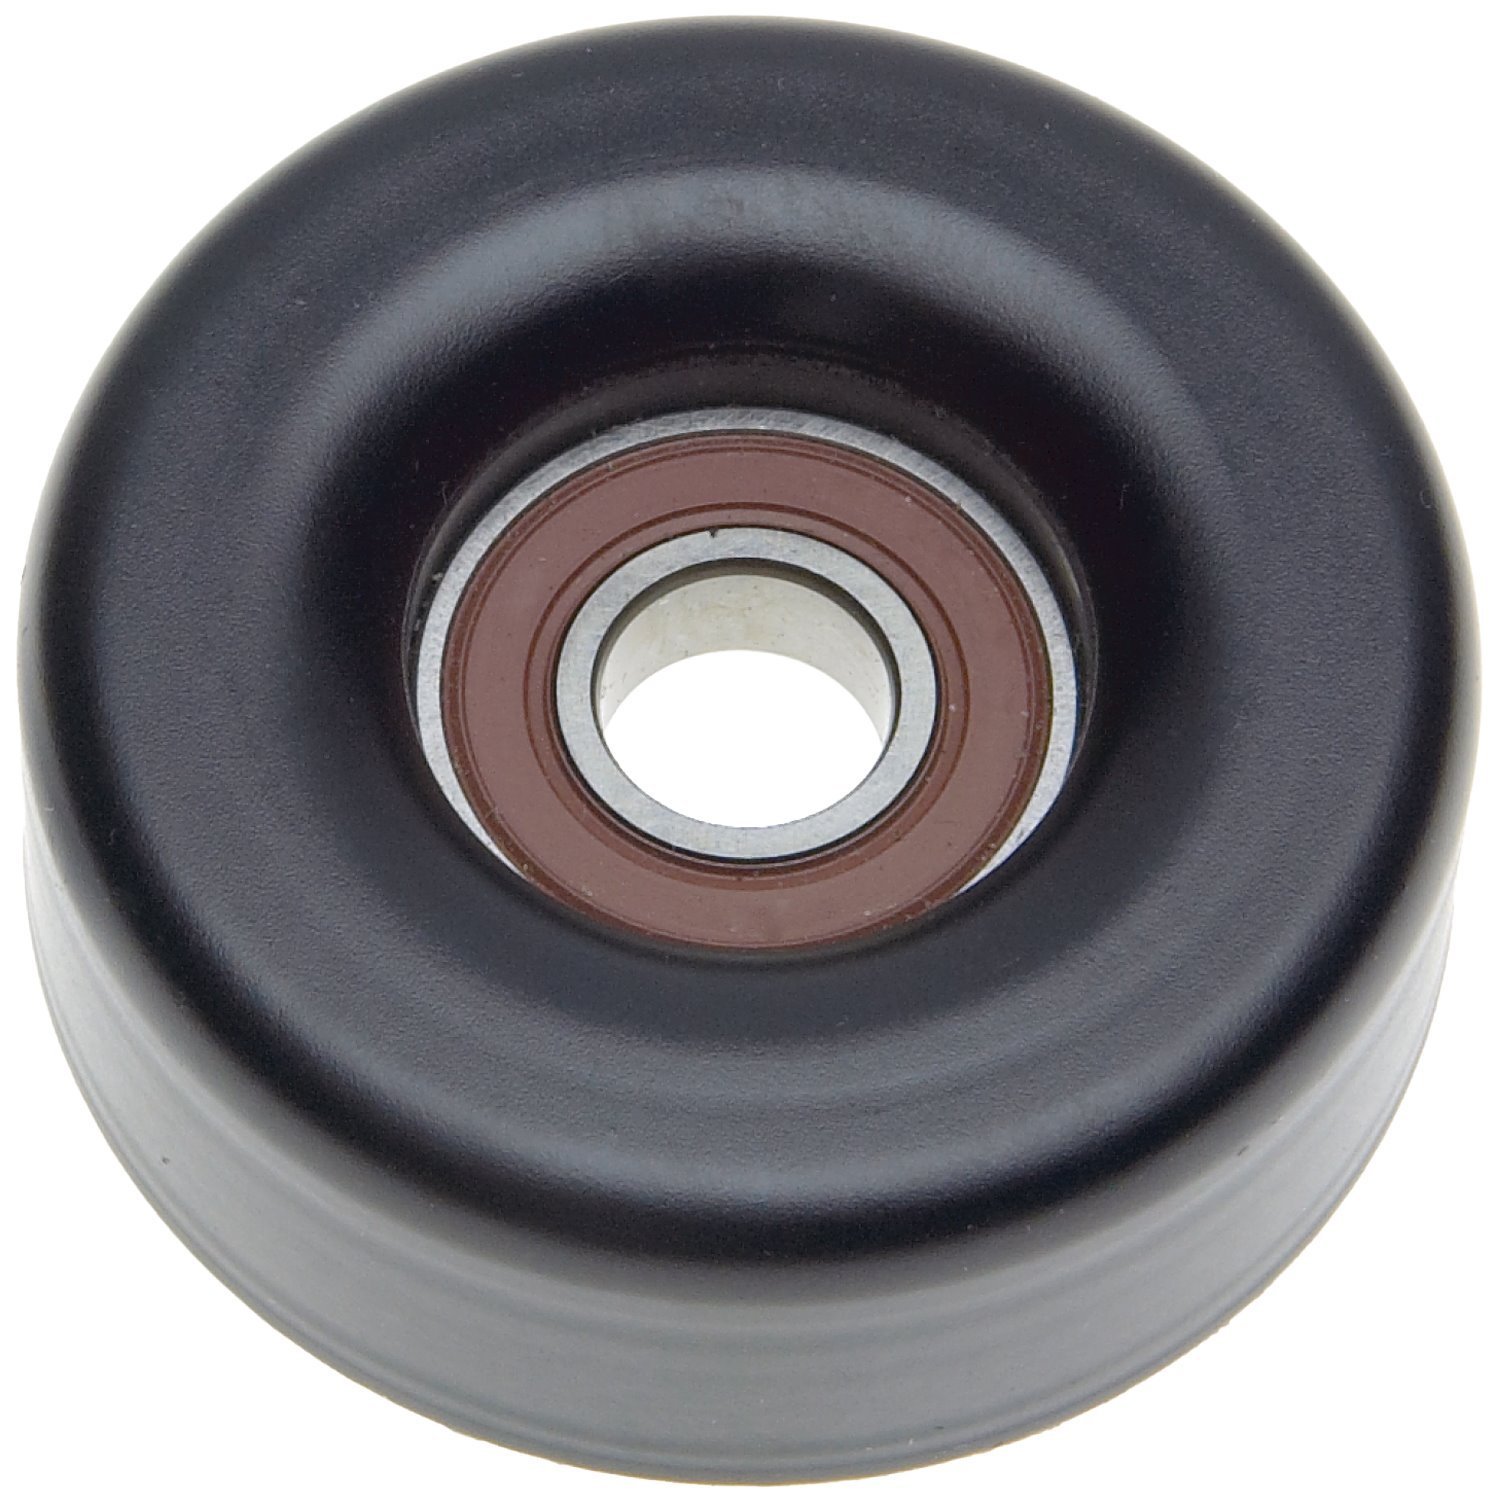 DriveAlign Idler Pulley Fits Select 1999-2009 Buick, Cadillac,